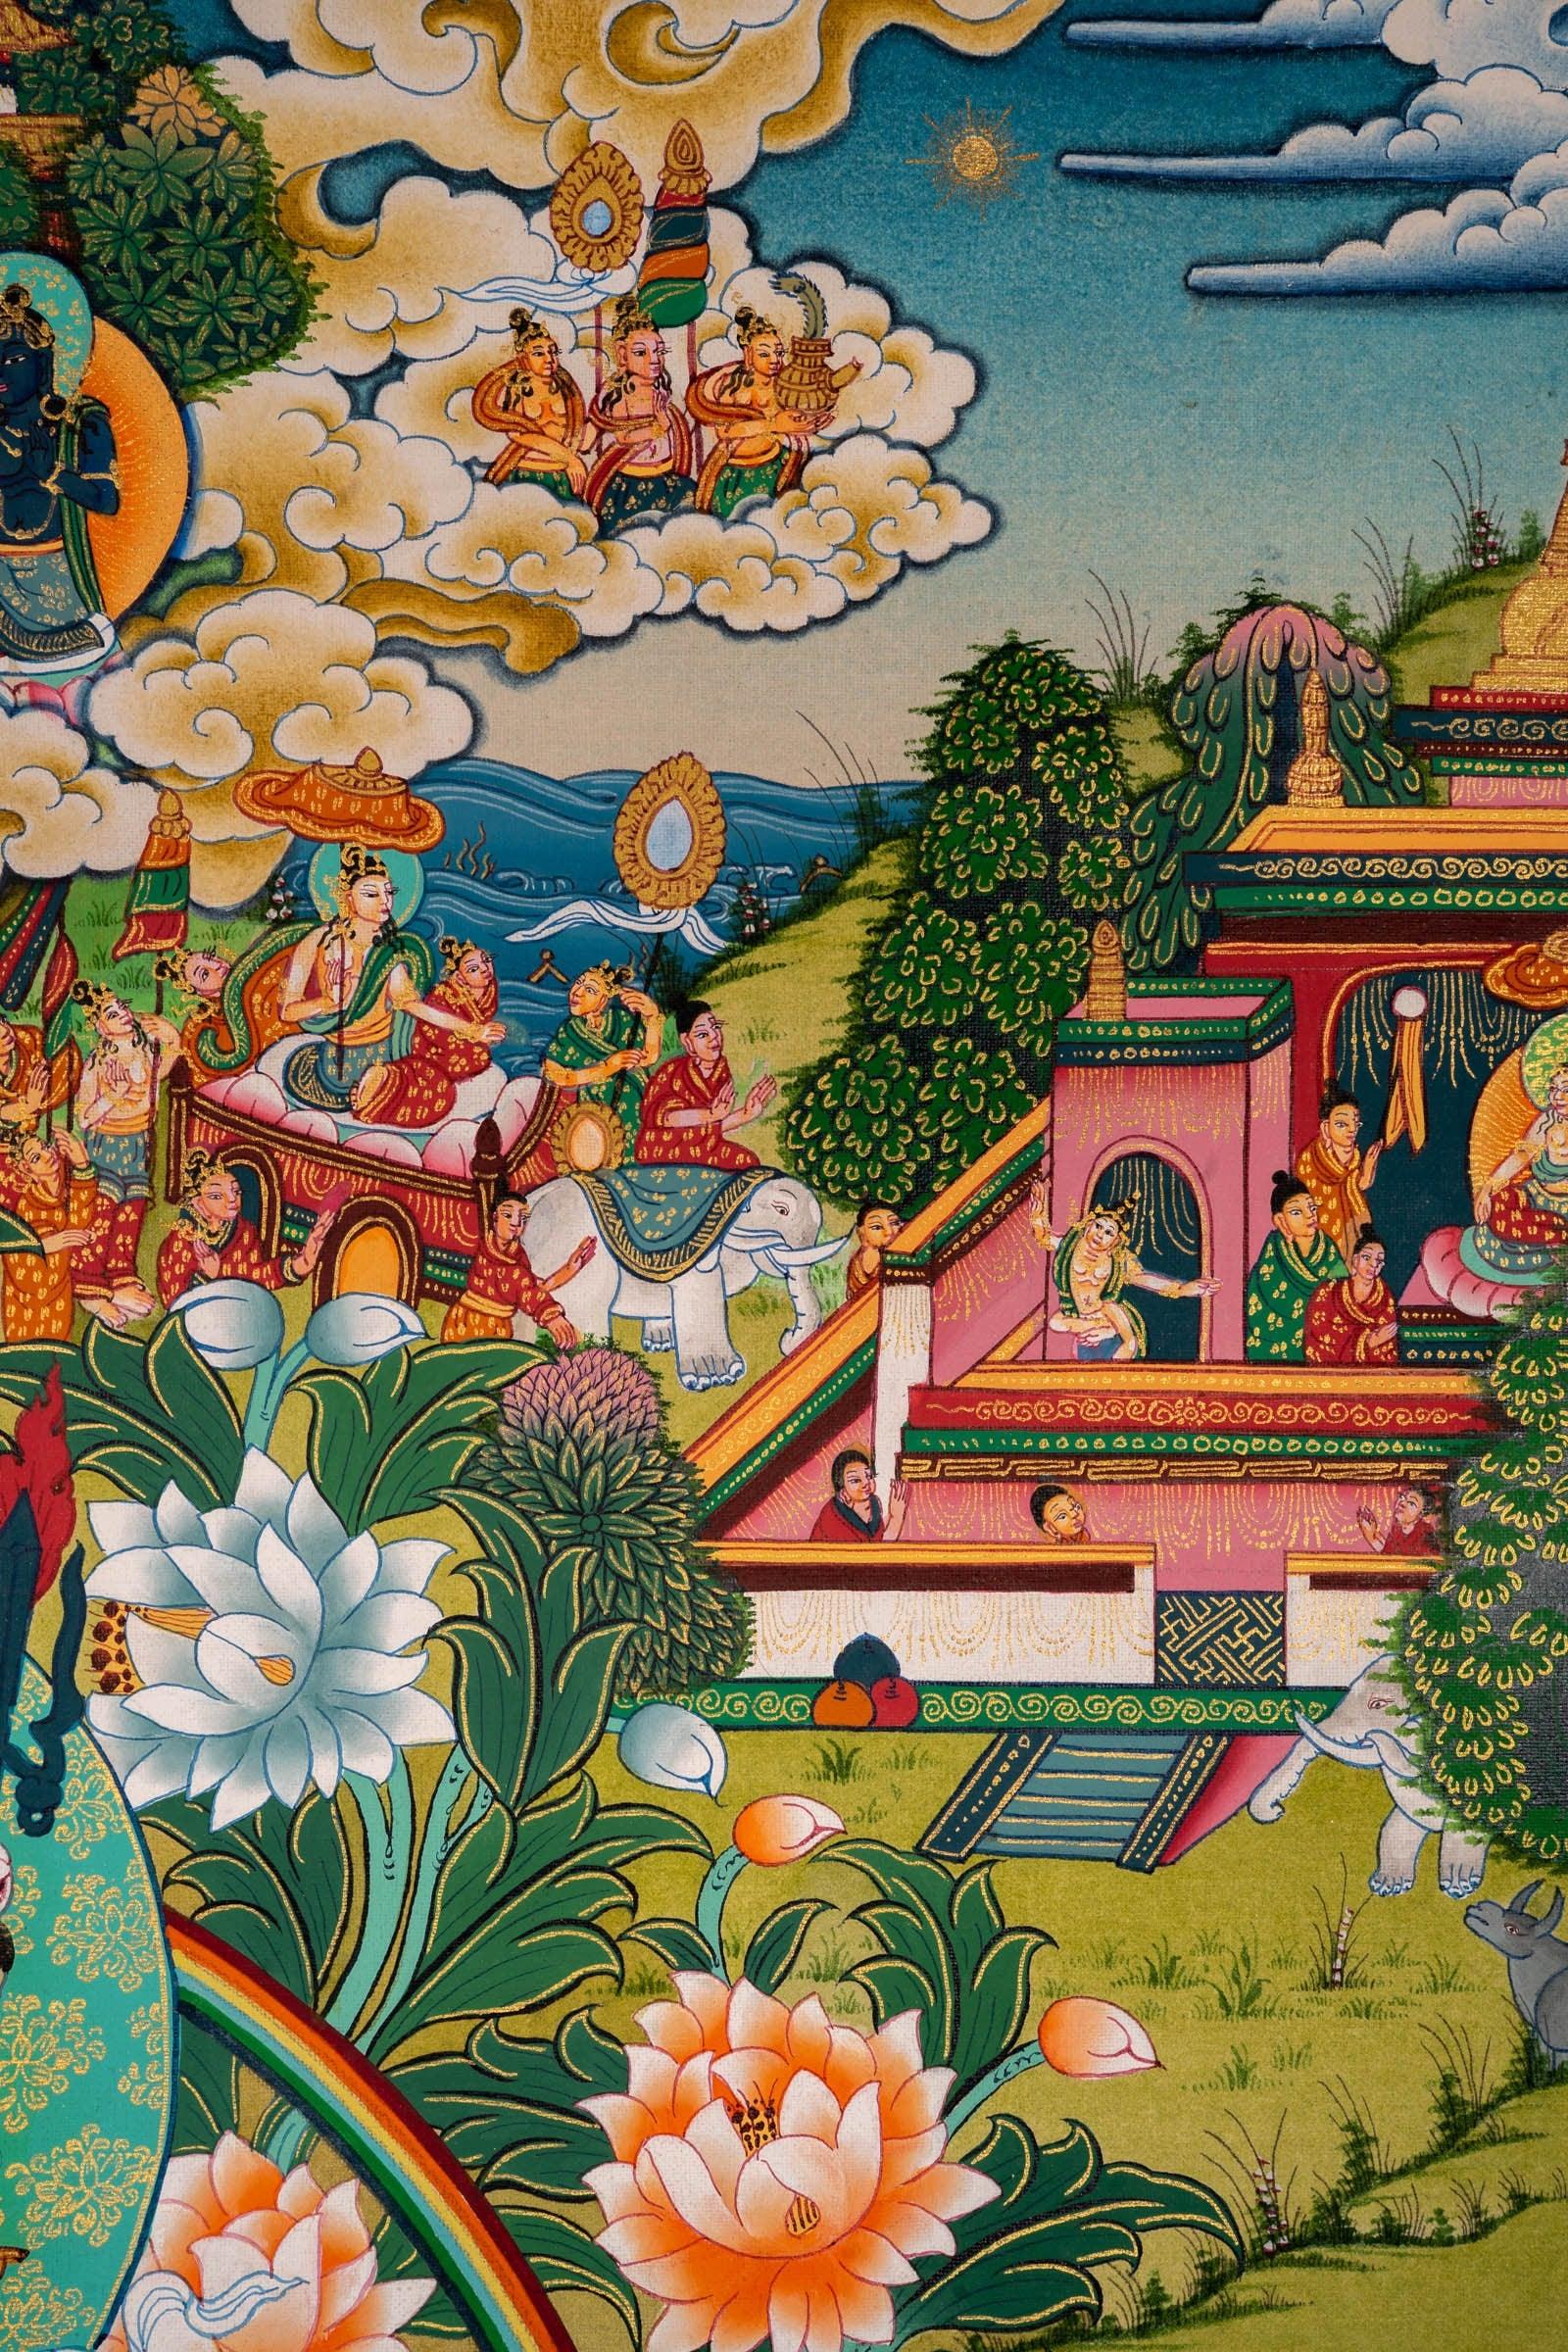 Guru Rinpoche Thangka Painting from Nepal  For home decor and and Wall hanging 